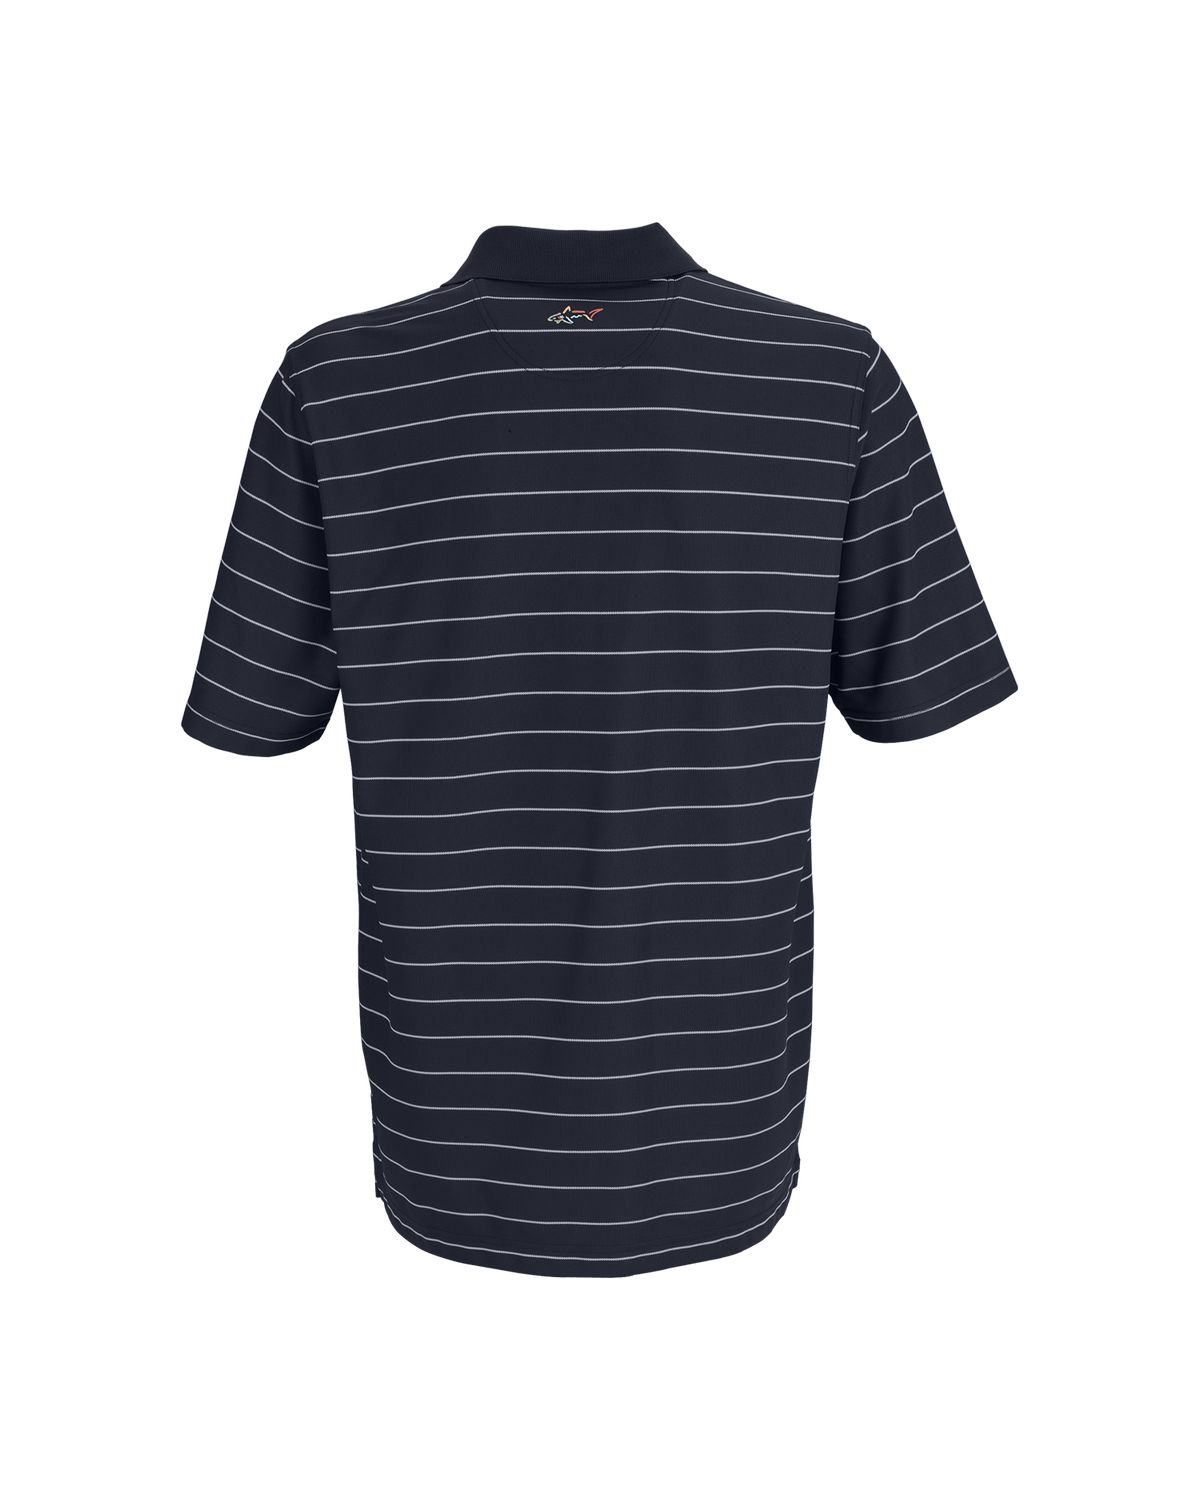 'Greg Norman GNS5K449 Play Dry Performance Striped Mesh Polo'